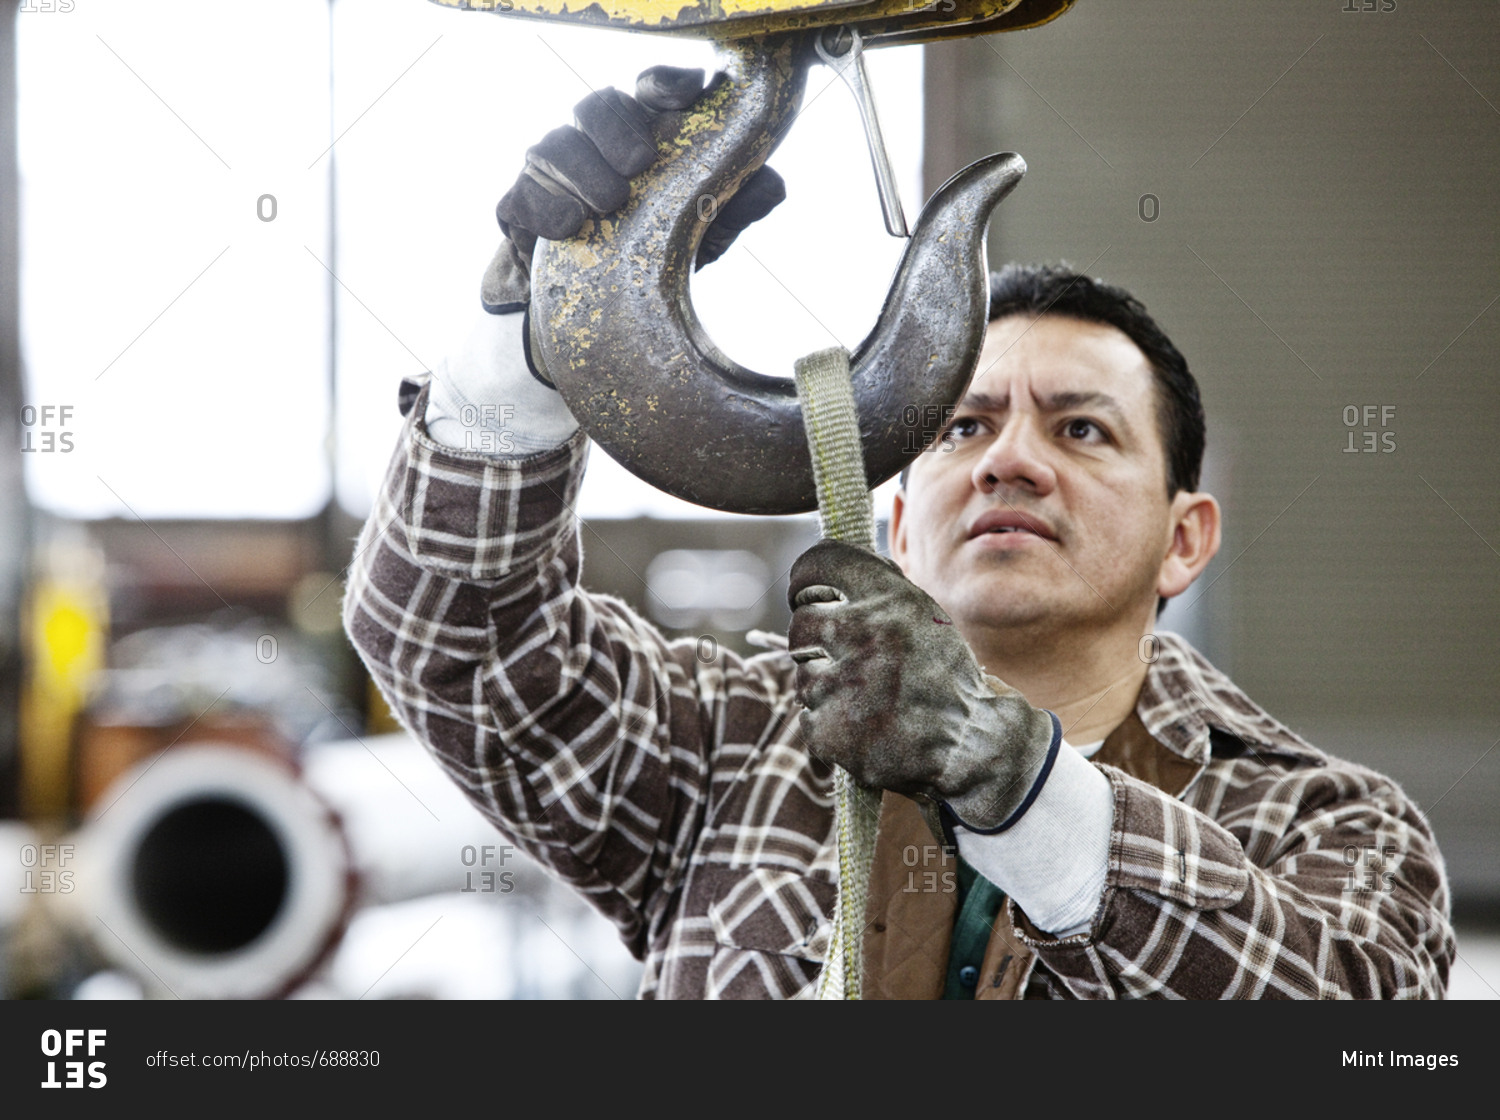 Hispanic man factory worker attaching a strap to the hook of a heavy duty overhead lift in a sheet metal factory